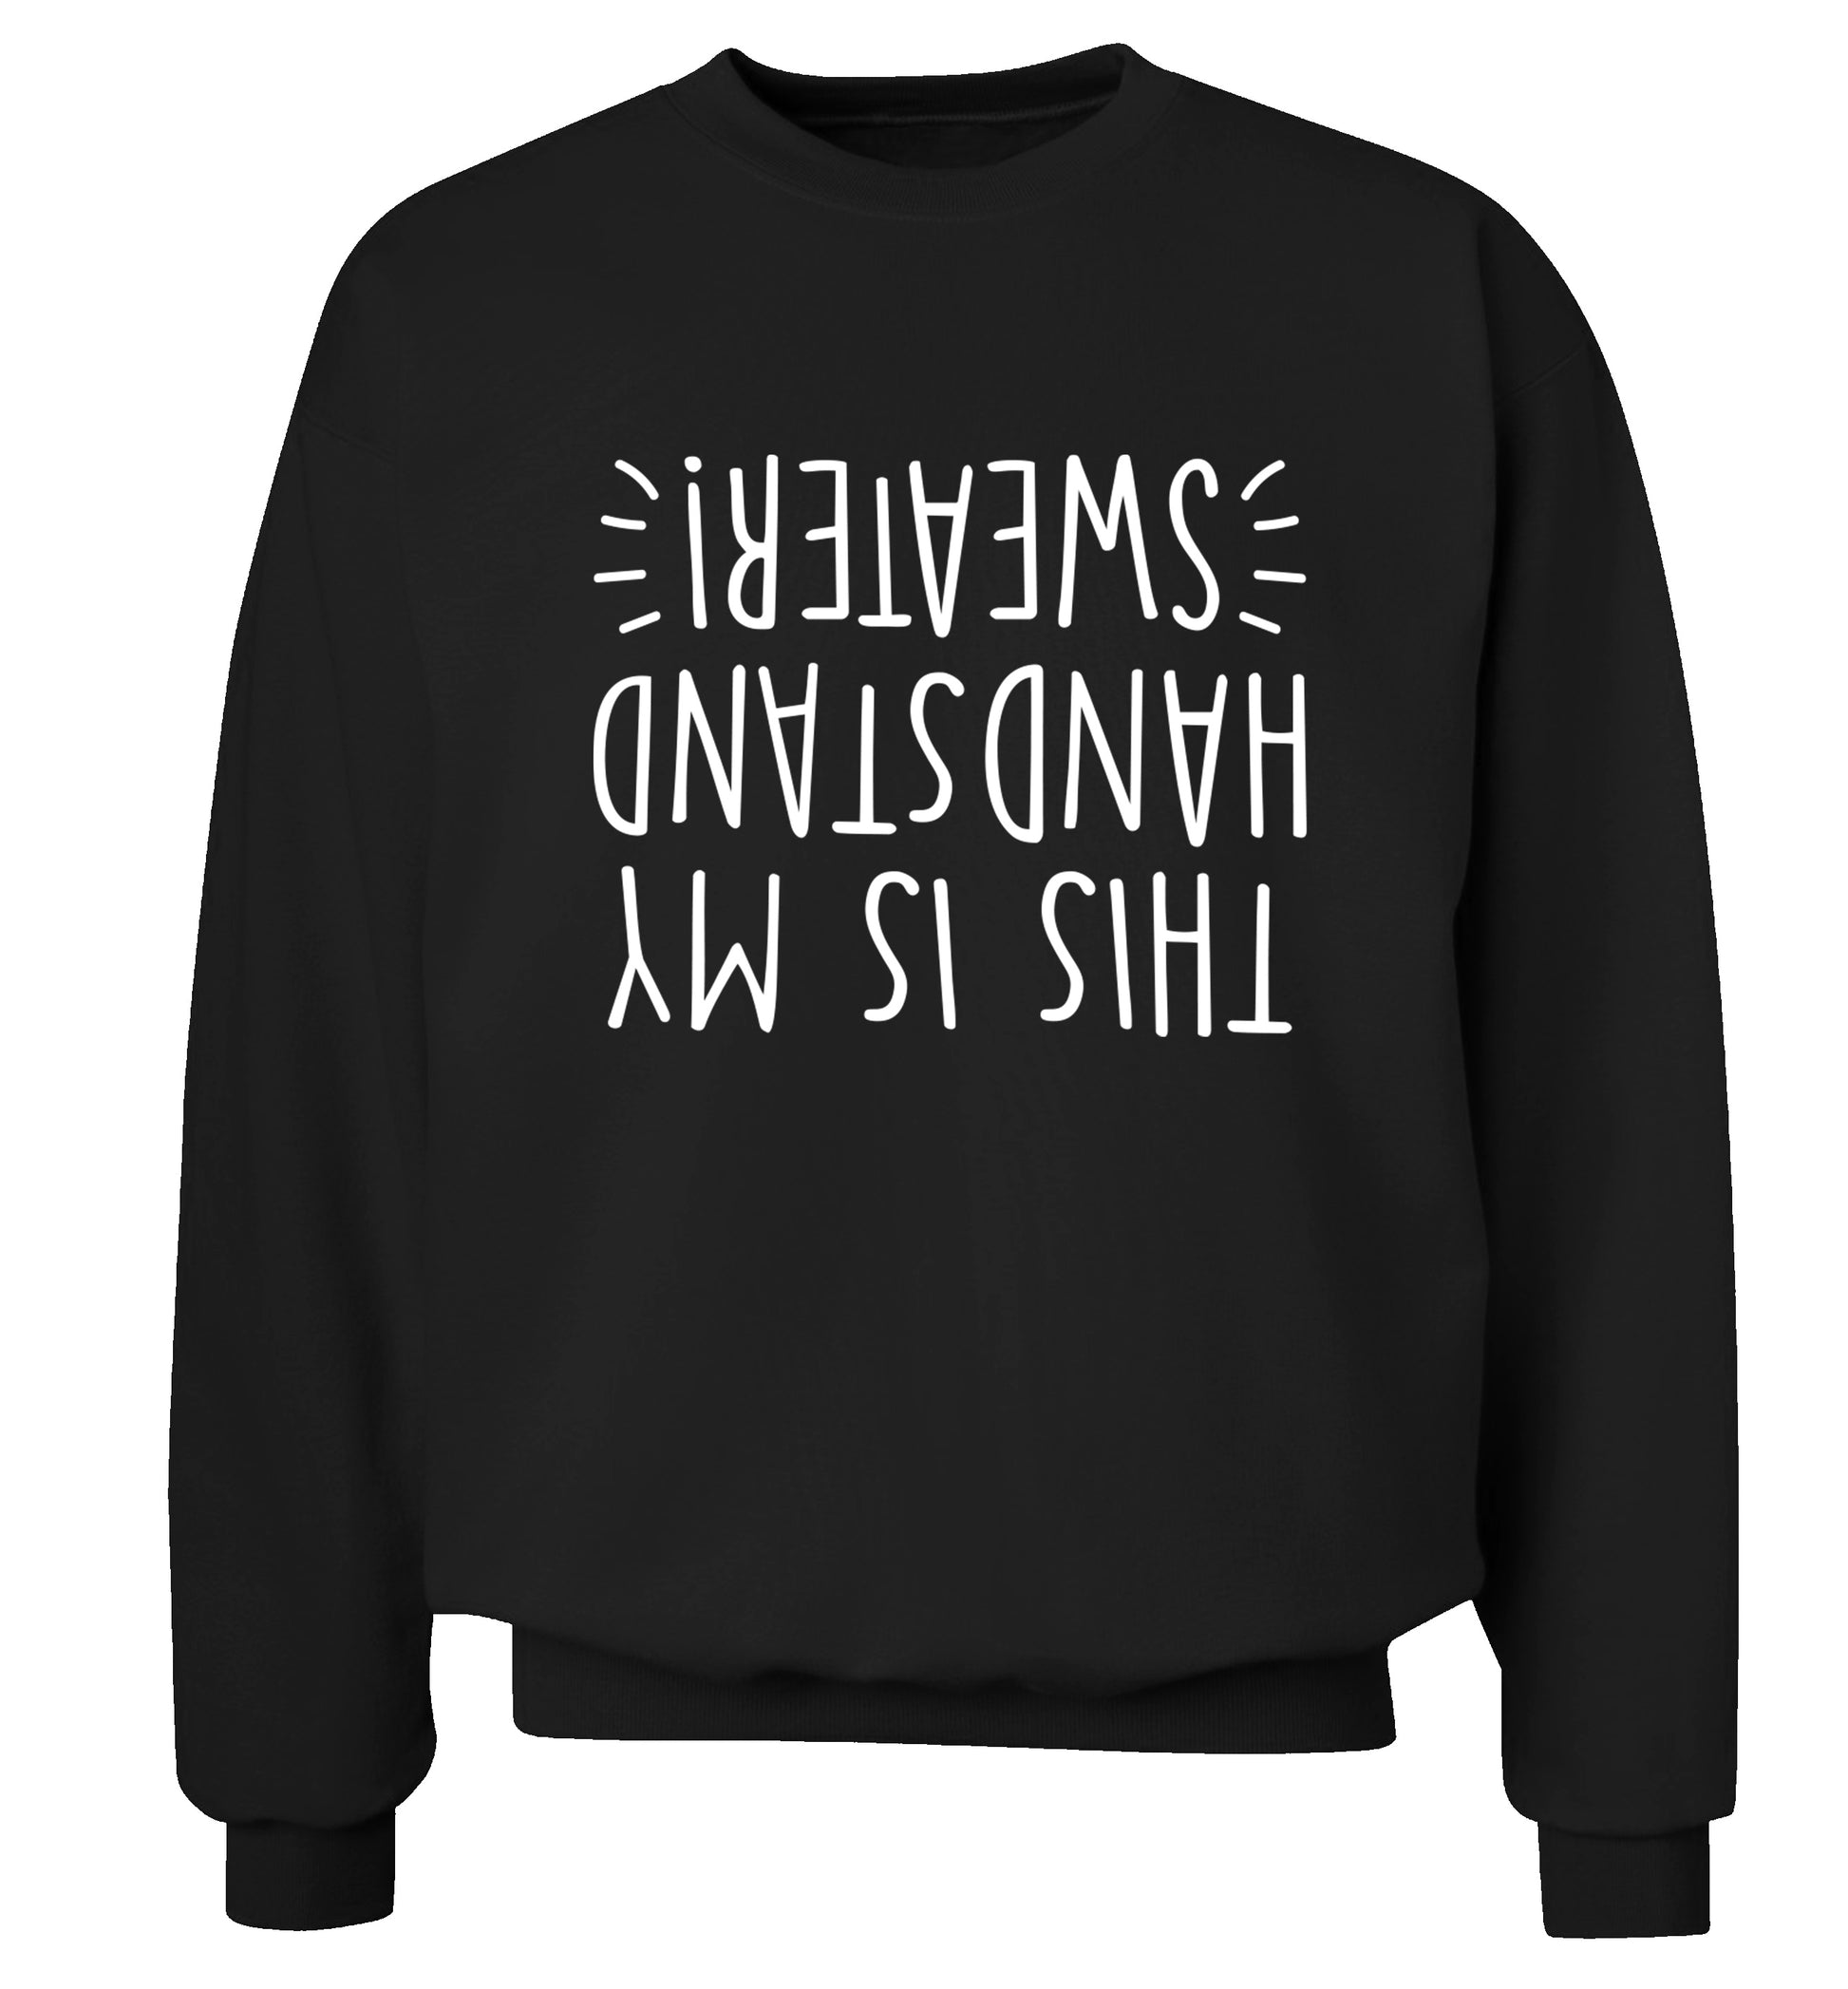 This is my handstand Adult's unisex black Sweater 2XL